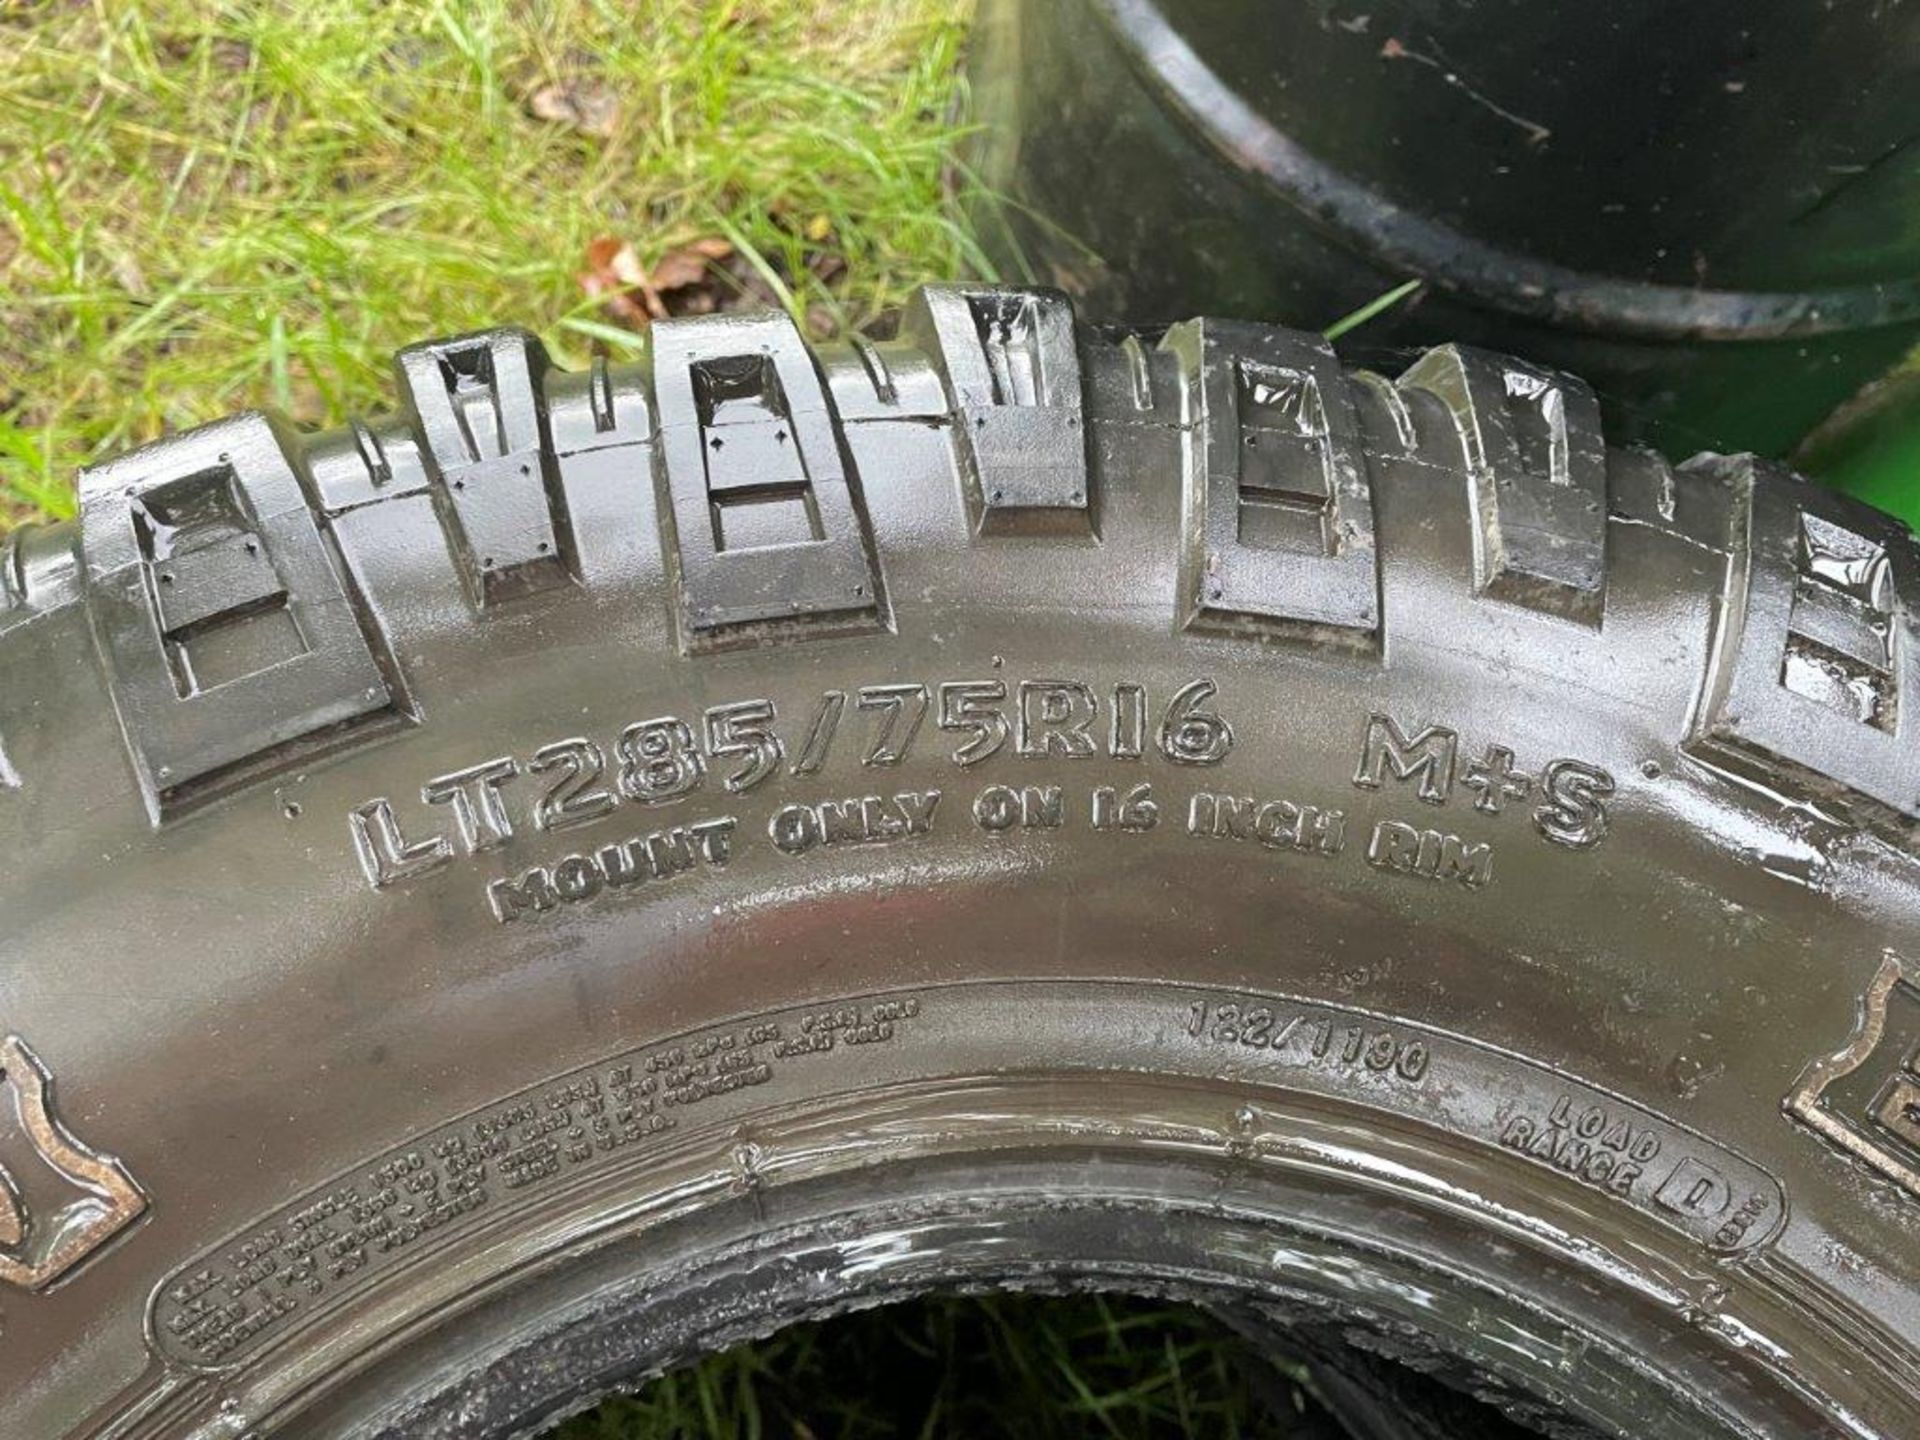 PAIR OF MICKEY THOMPSON BAHA LT285 75 R16 TIRES - Image 3 of 4